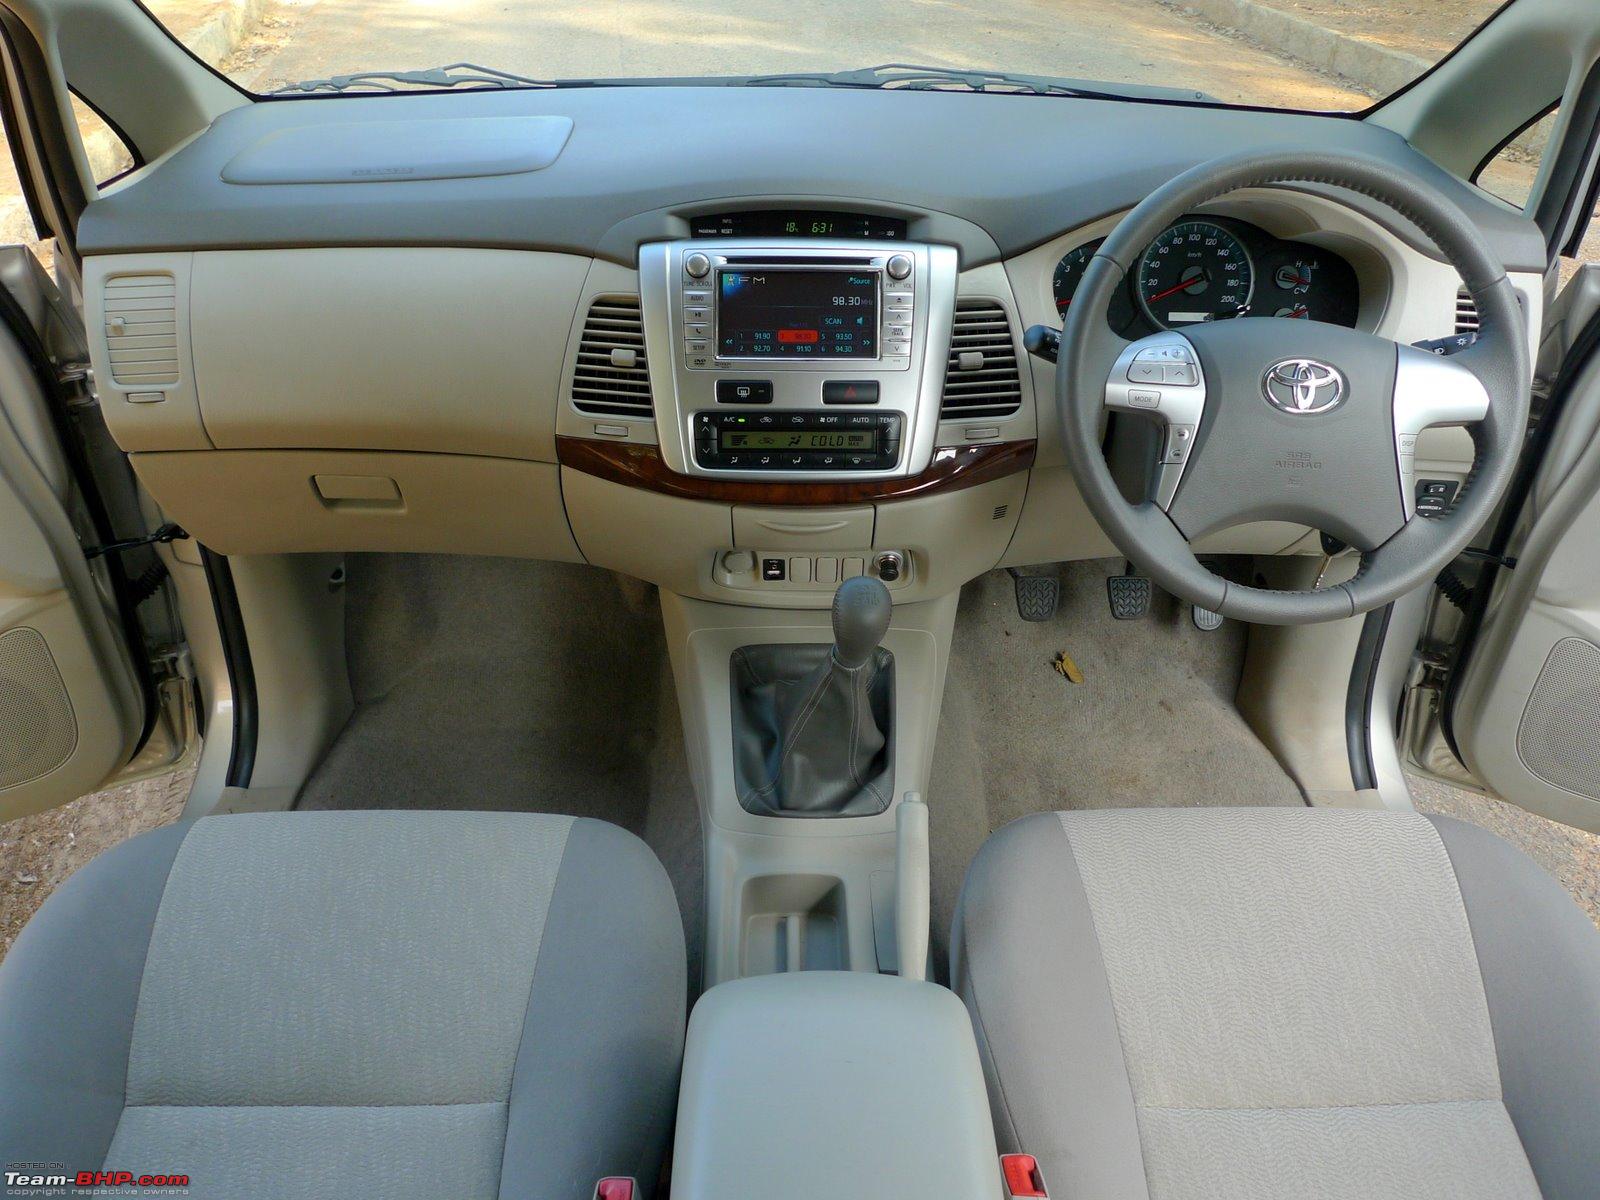 A Close Look At The 2012 Toyota Innova Facelift Team Bhp